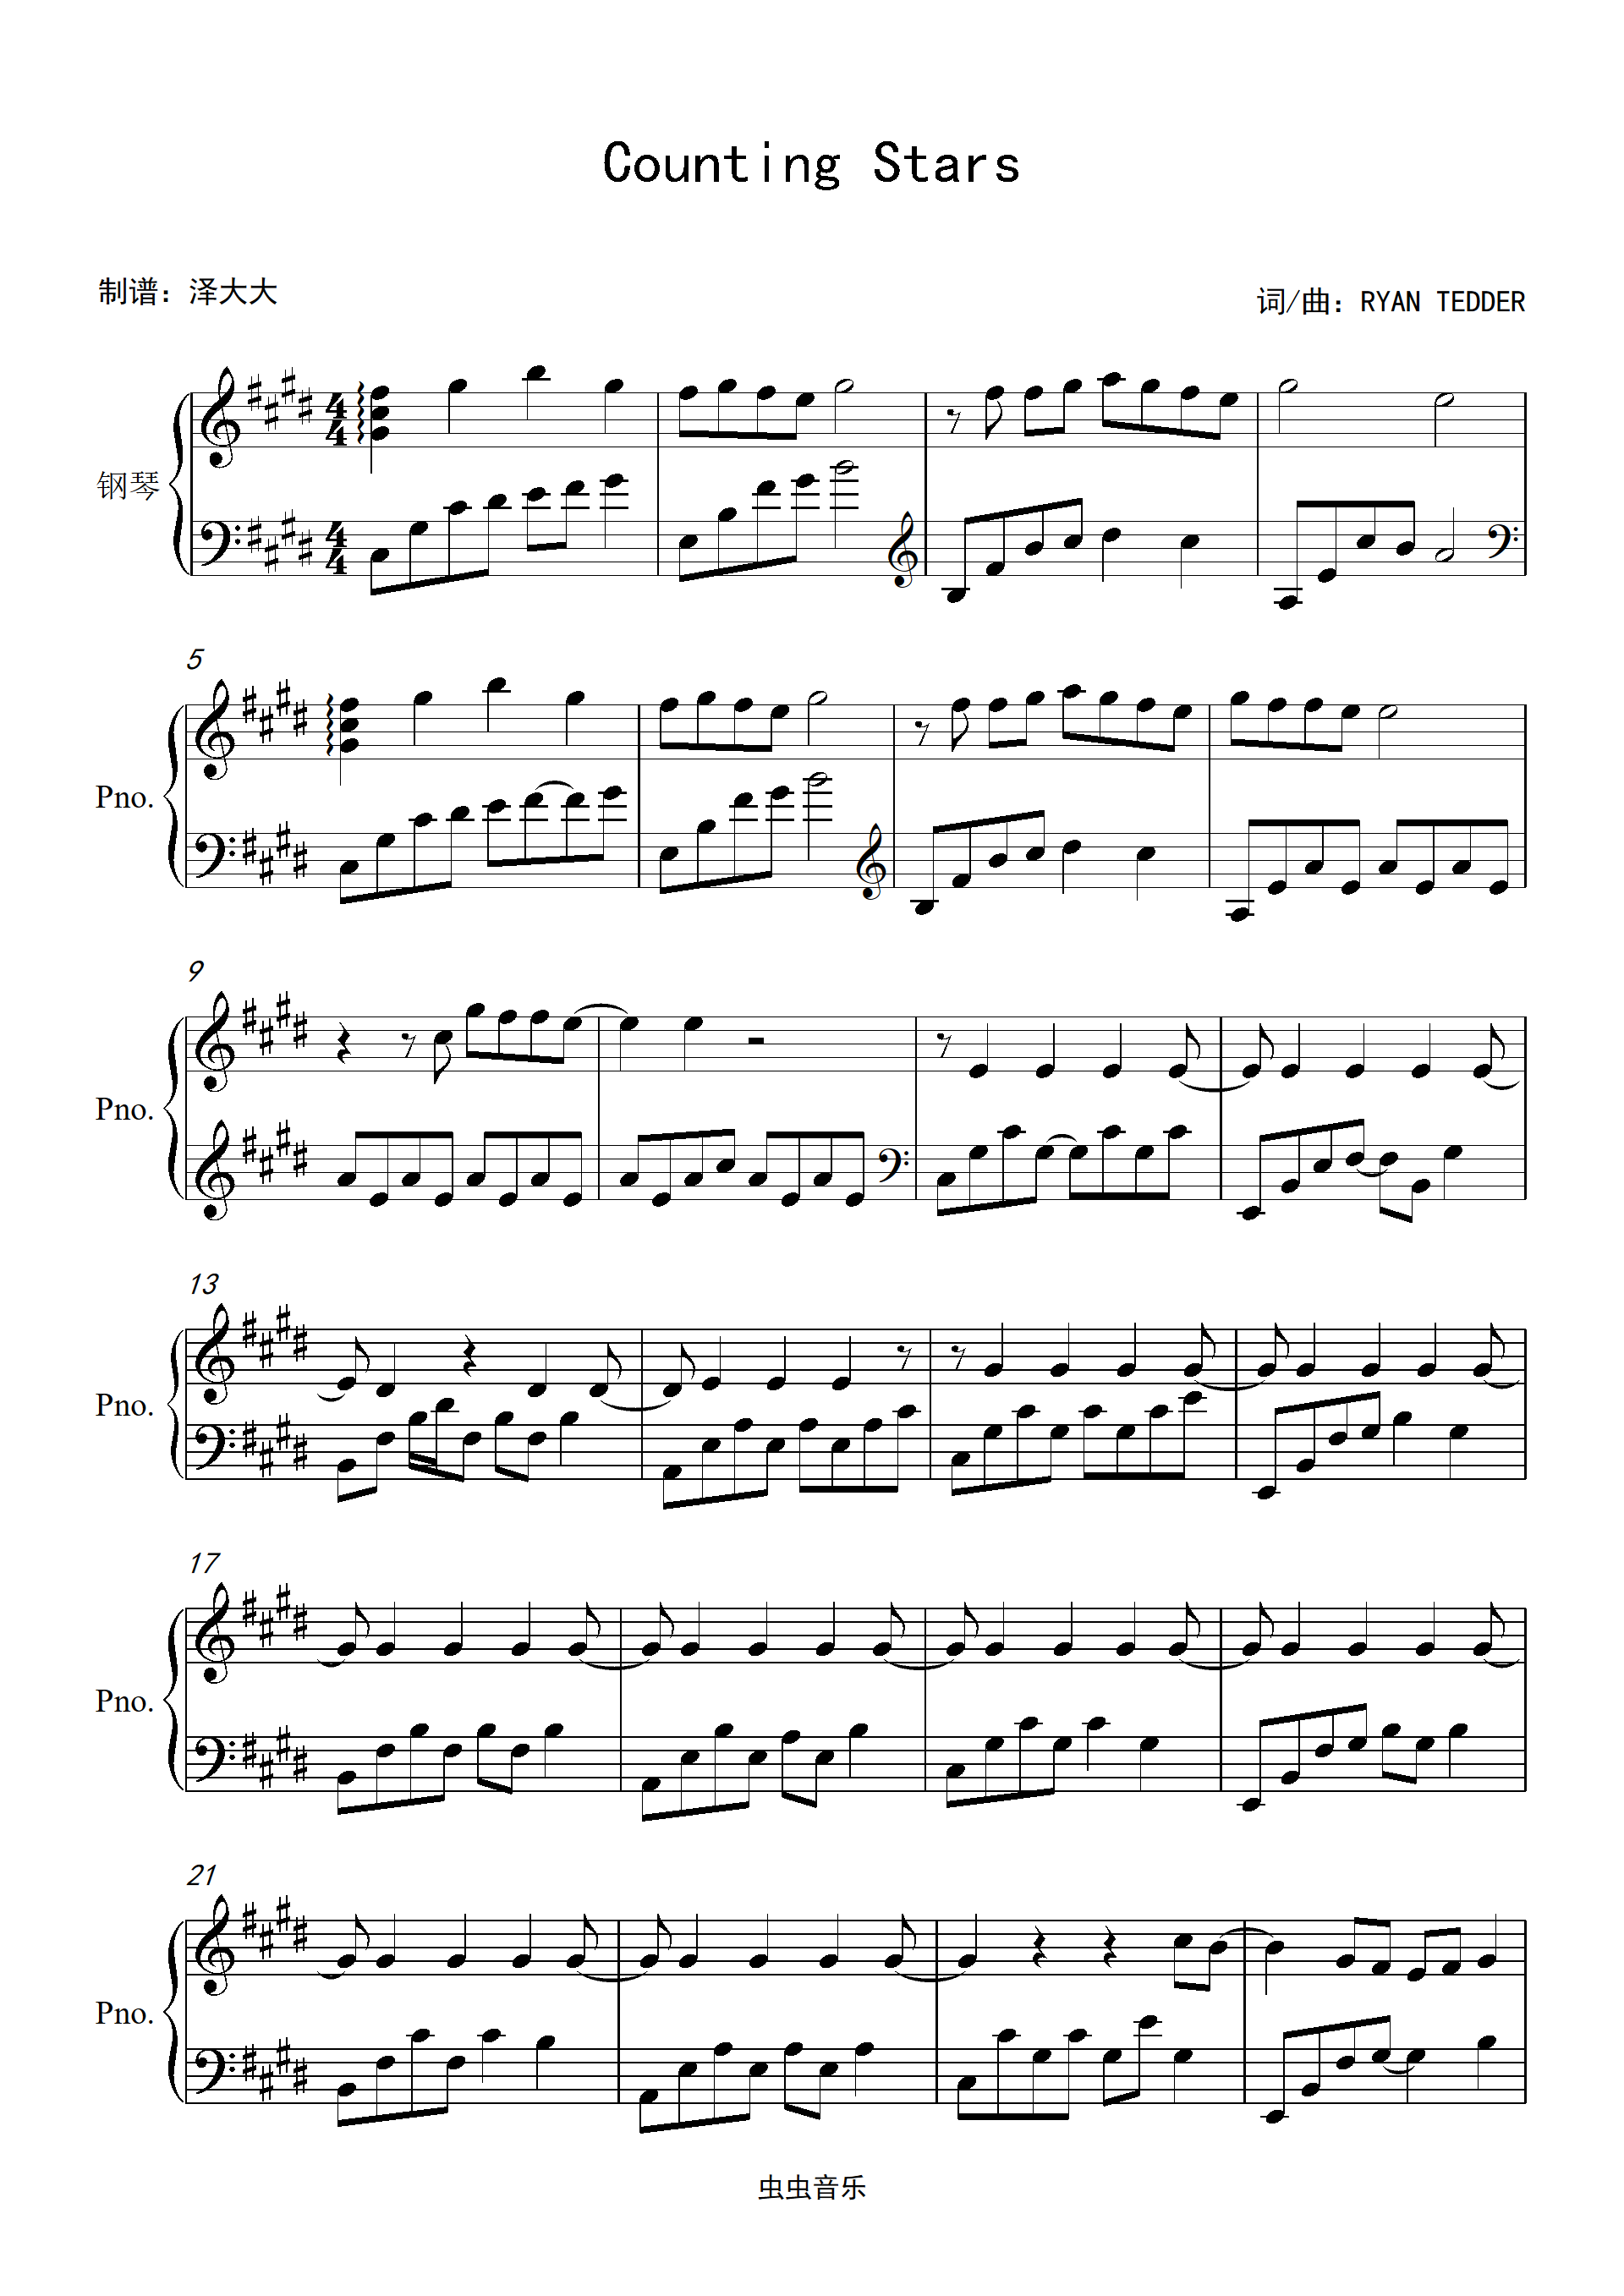 Counting Stars (Really Easy Guitar) - Print Sheet Music Now